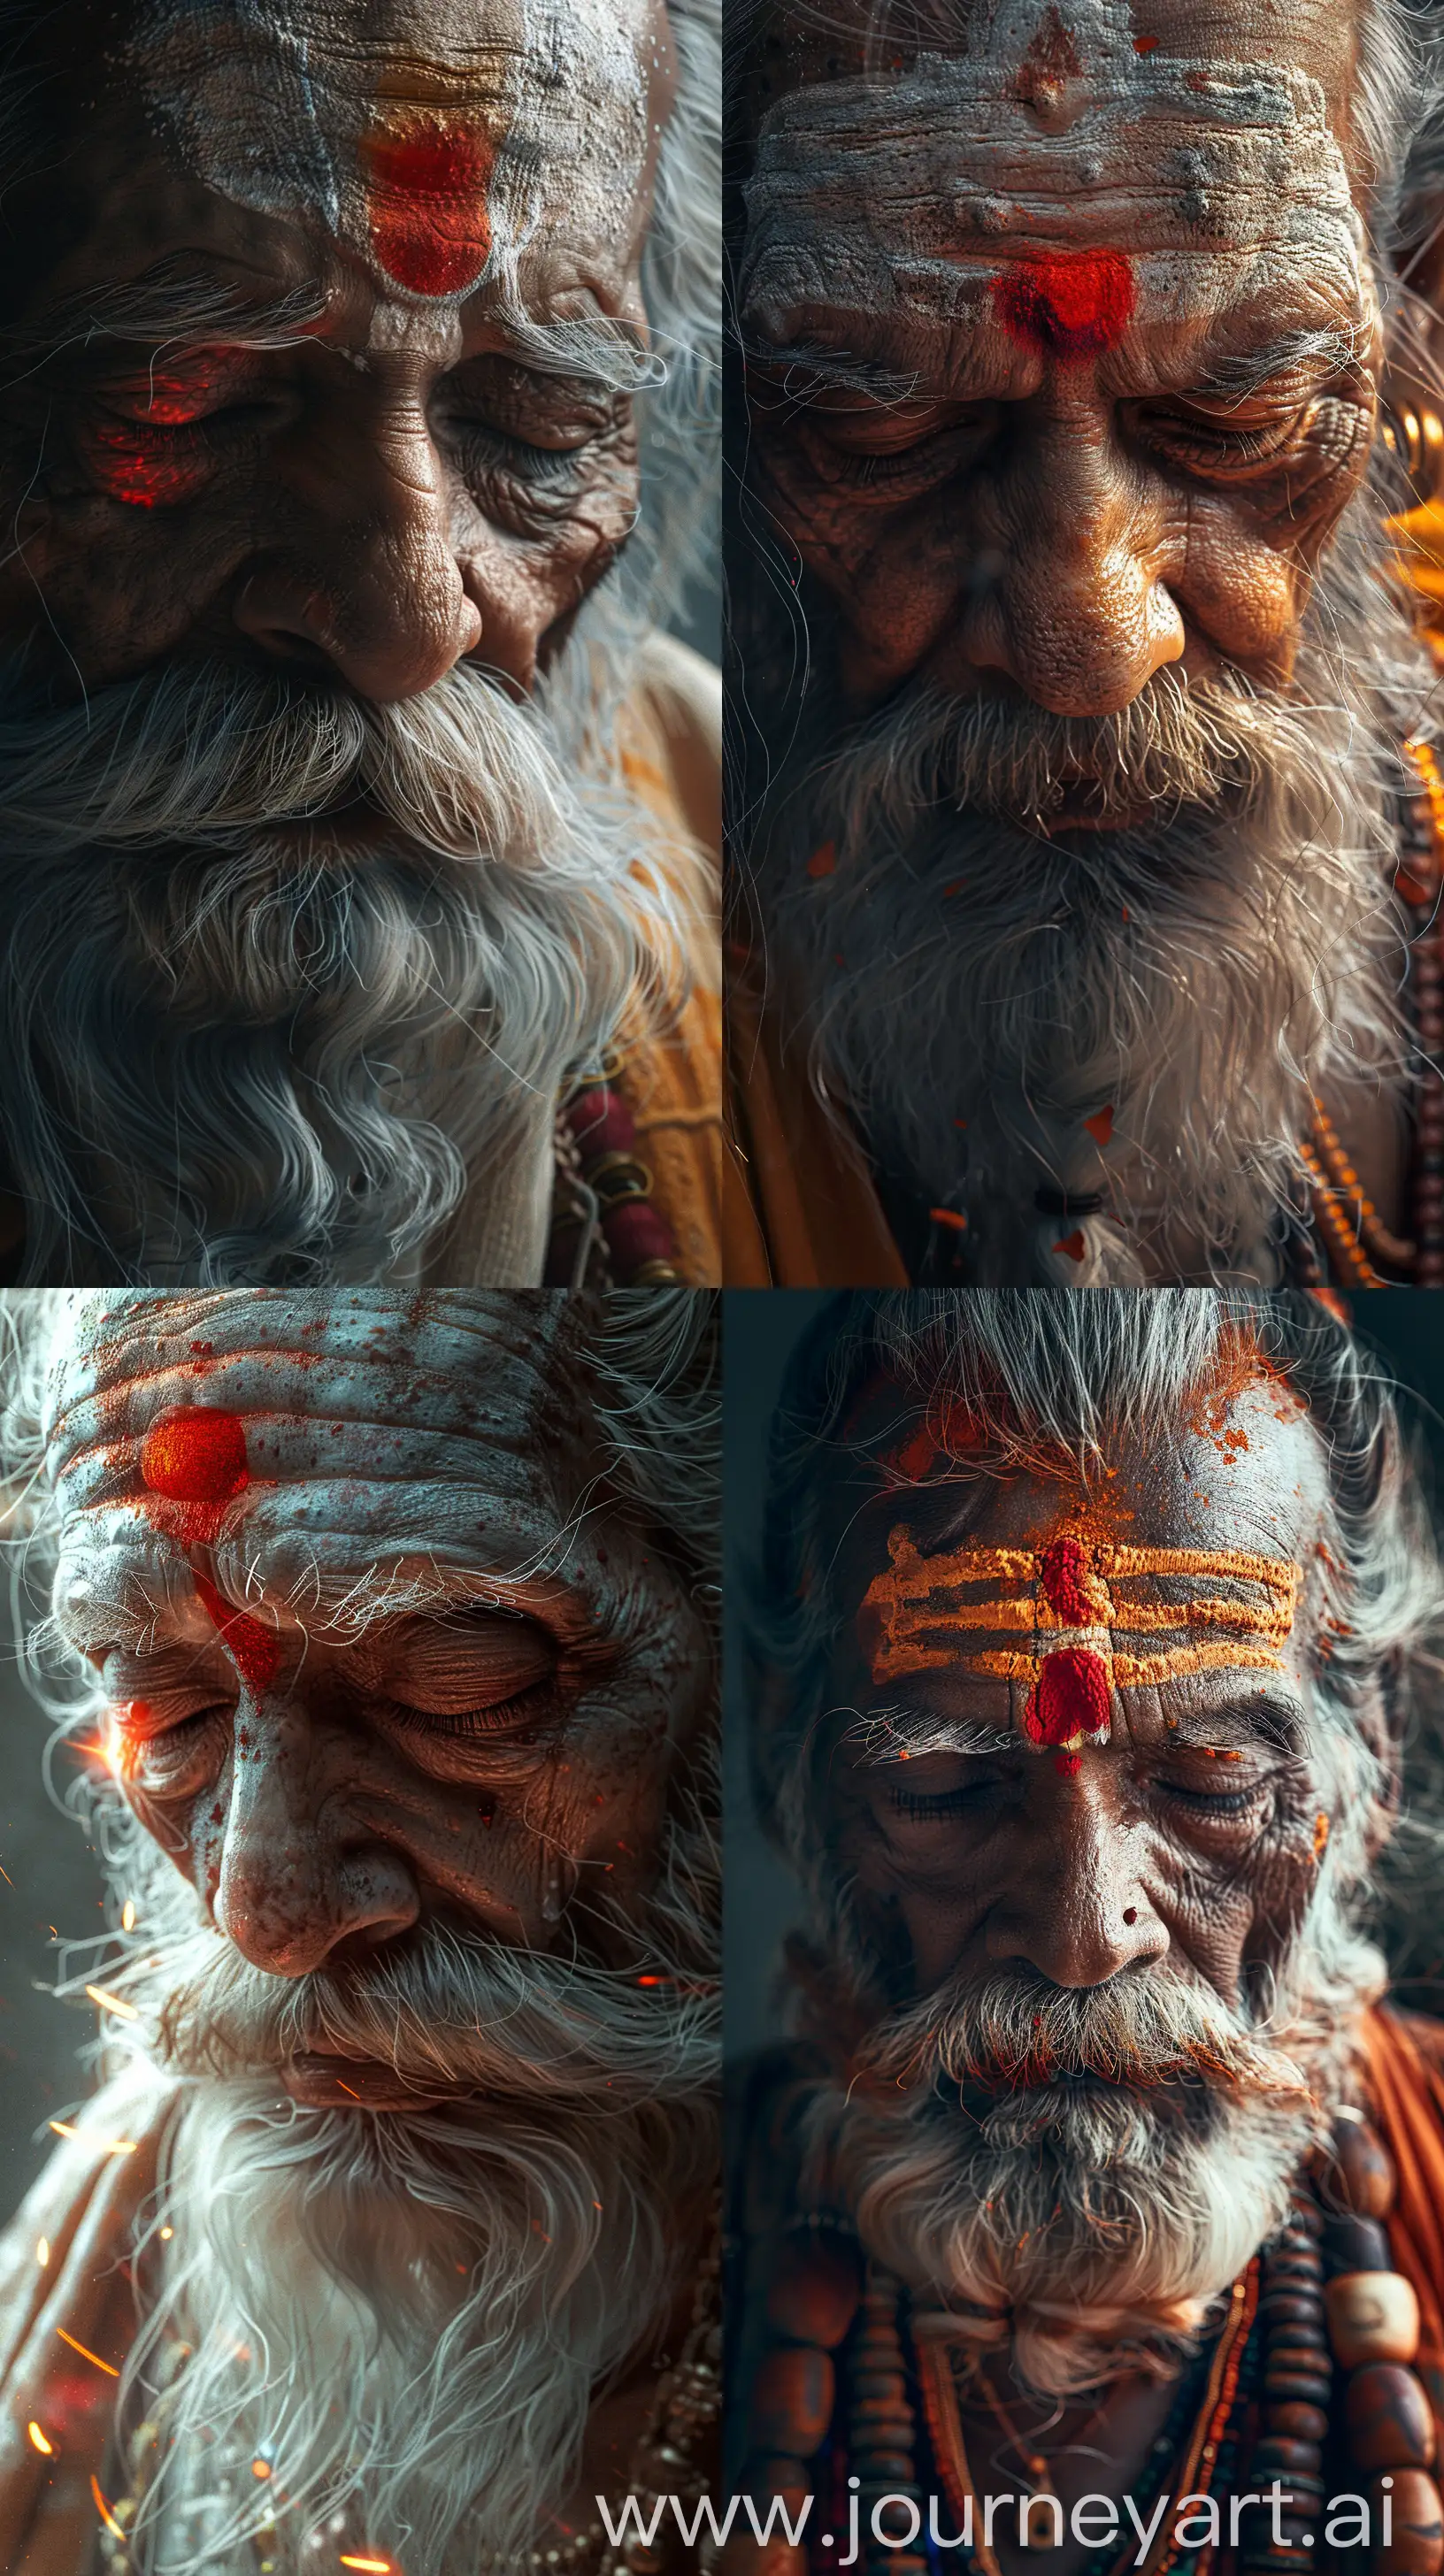 Elderly Indian sage, ancient times vibe, closed left eye, red fluid flowing from his left eye, close-up, high resolution 8k detail, wise expression, aged skin textures, traditional attire, mystical aura --s 300 --ar 9:16 --v 6